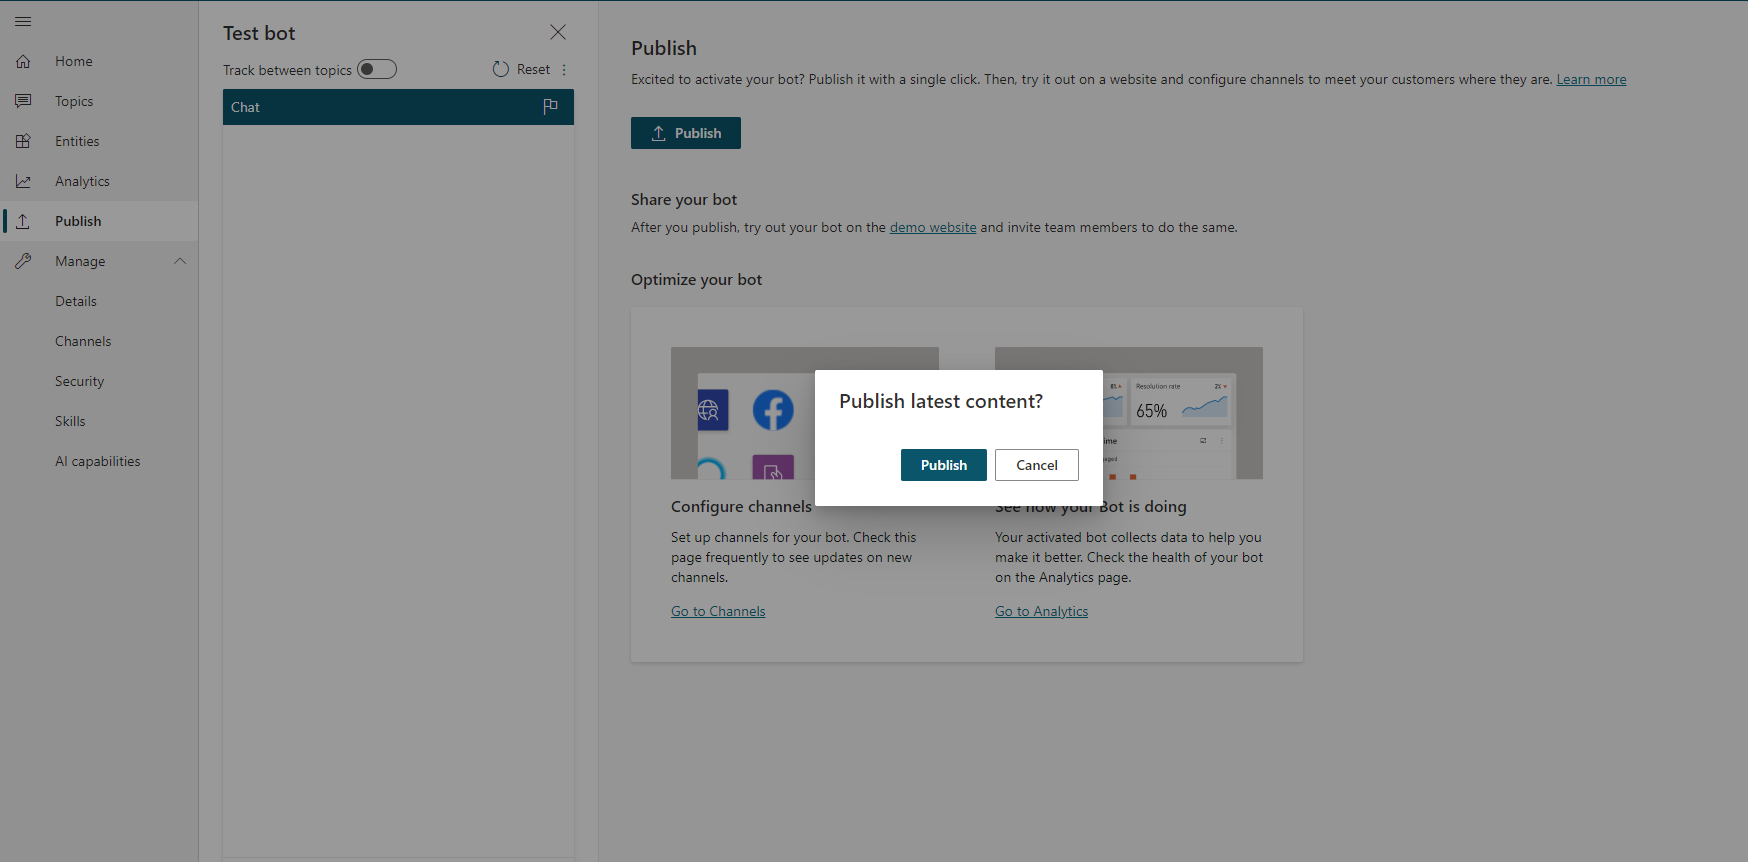 Validate latest bot content for publish